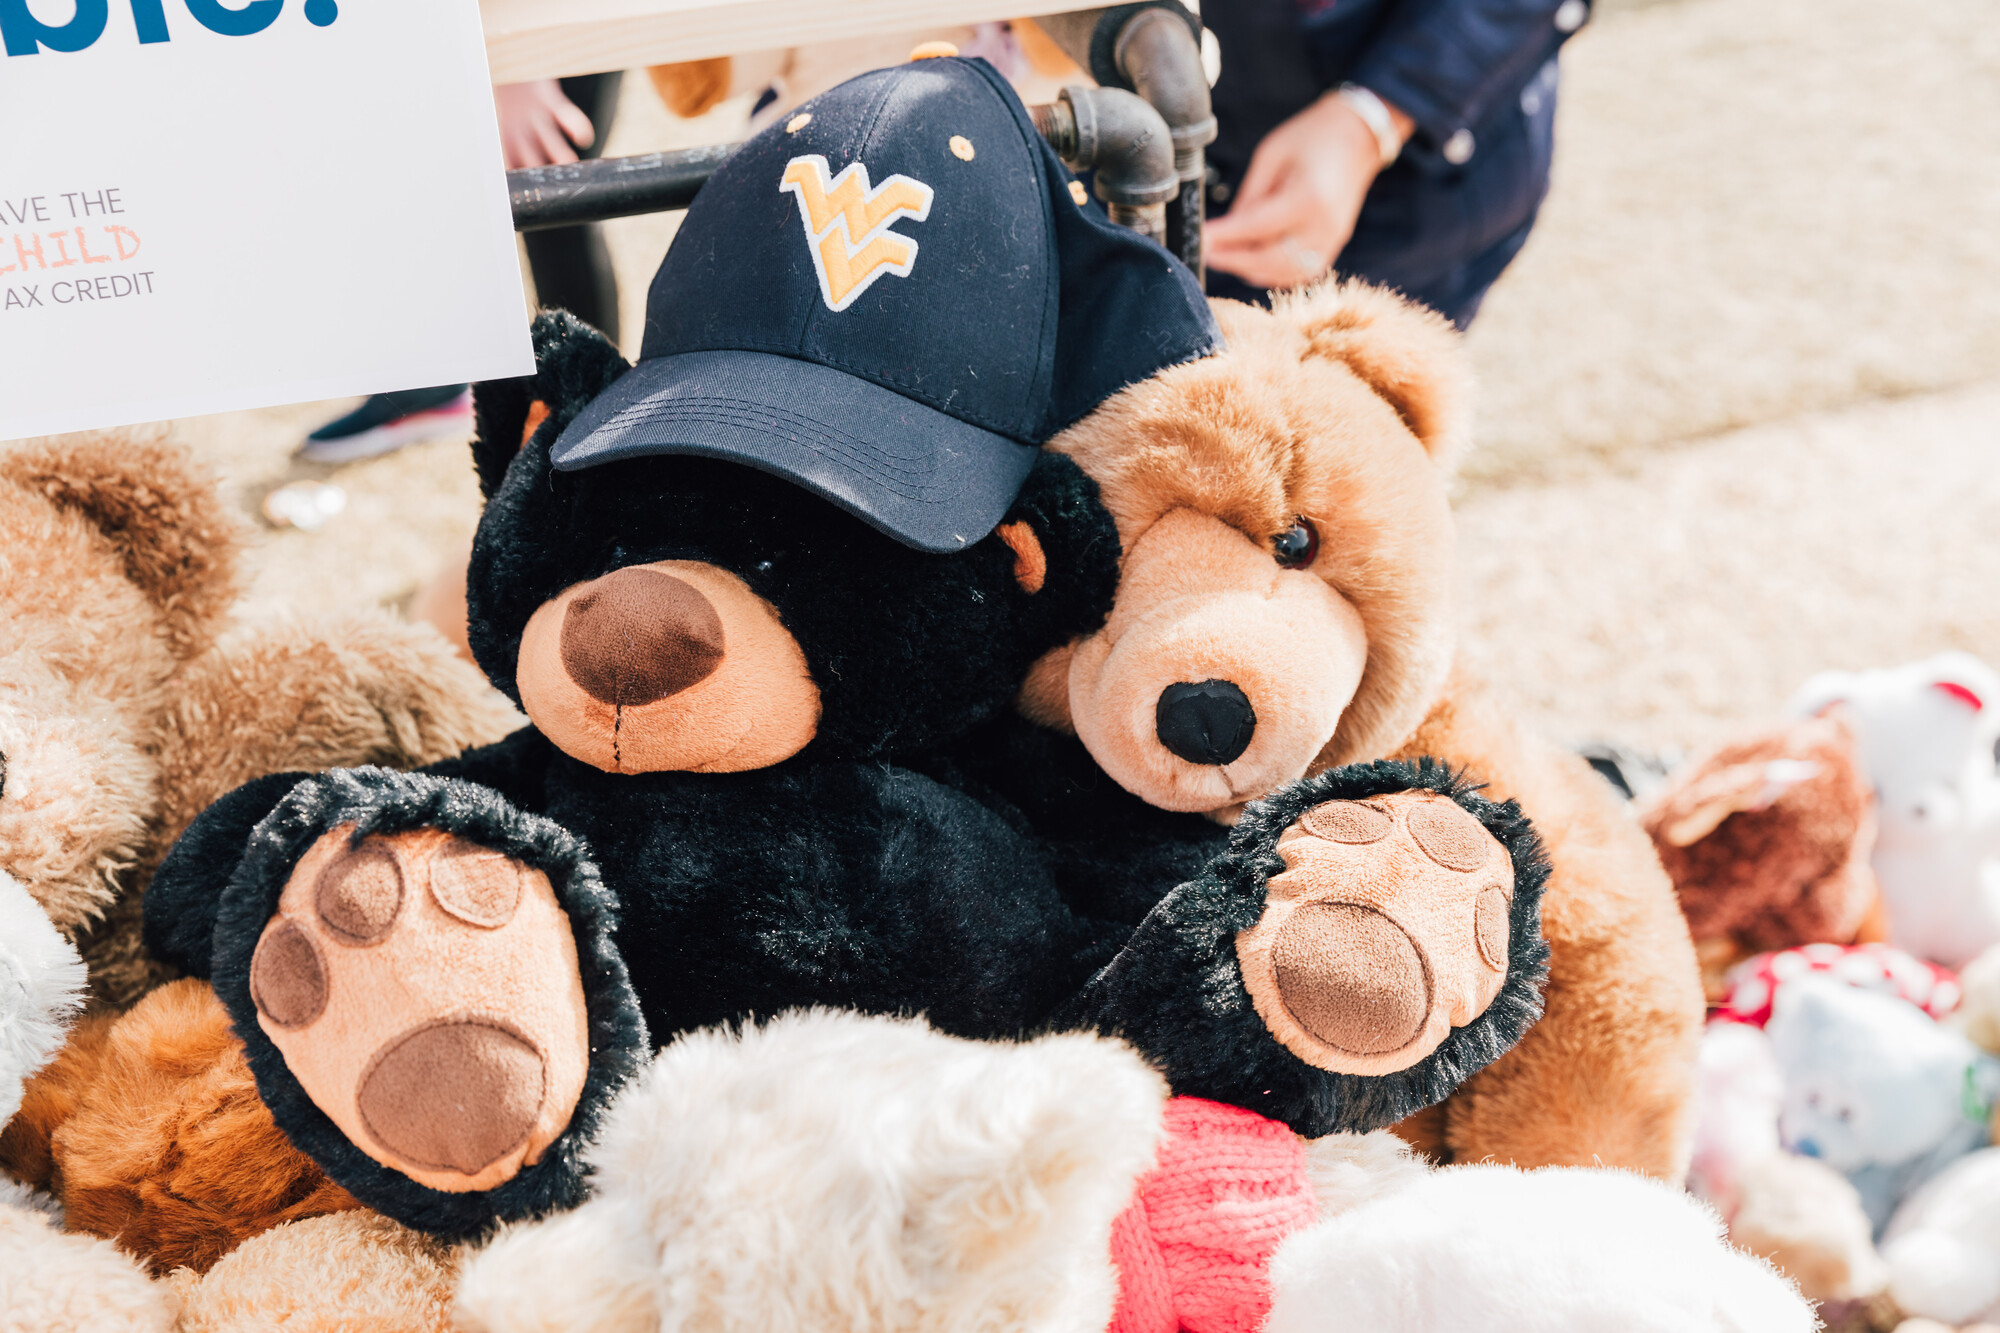 Teddy bears with WV hat